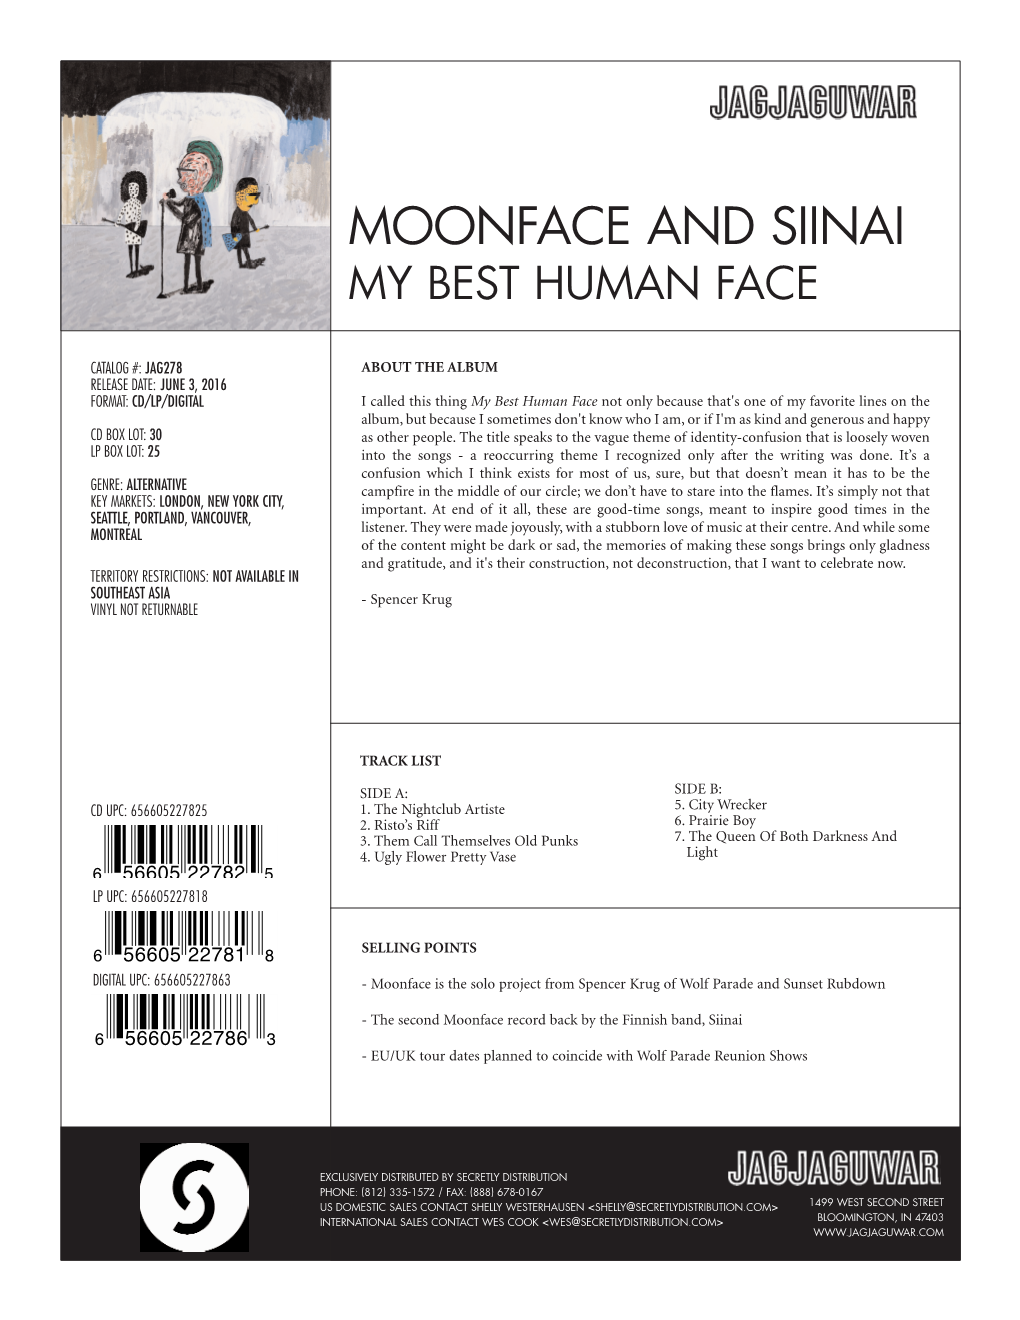 Moonface and Siinai My Best Human Face